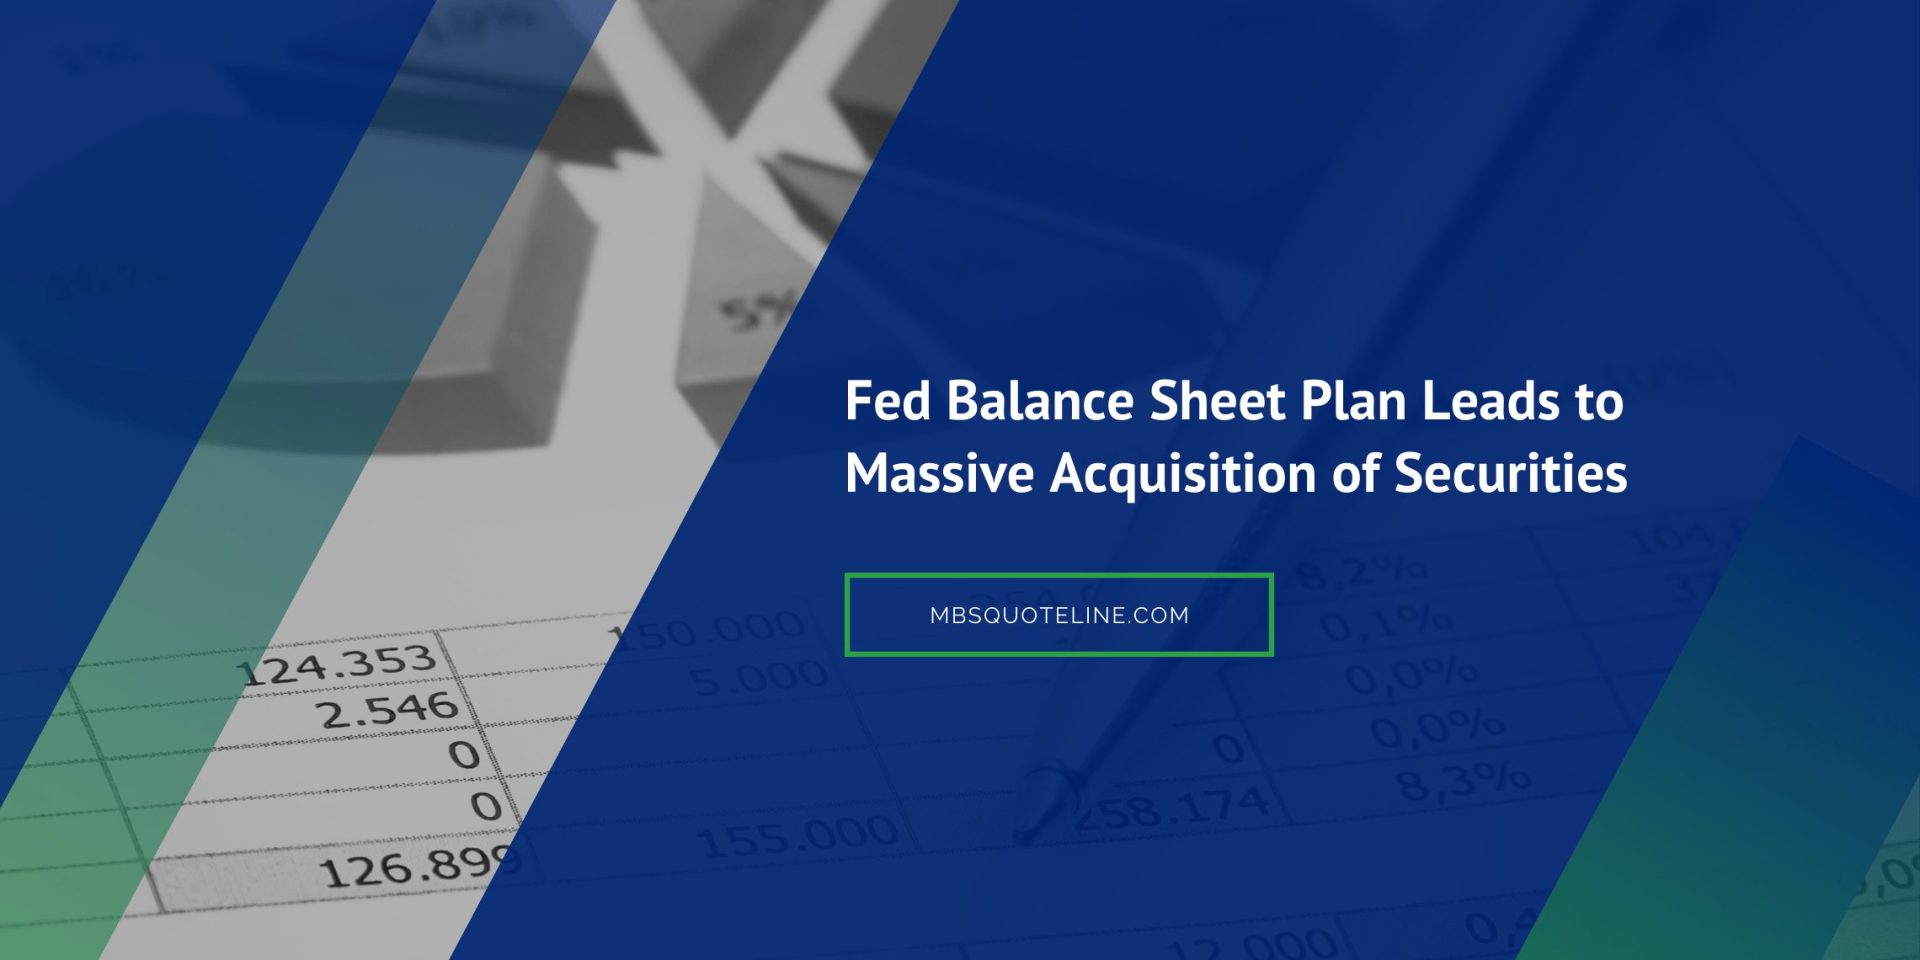 fed balance sheet plan leads to massive acquisition of securities news mbsquoteline